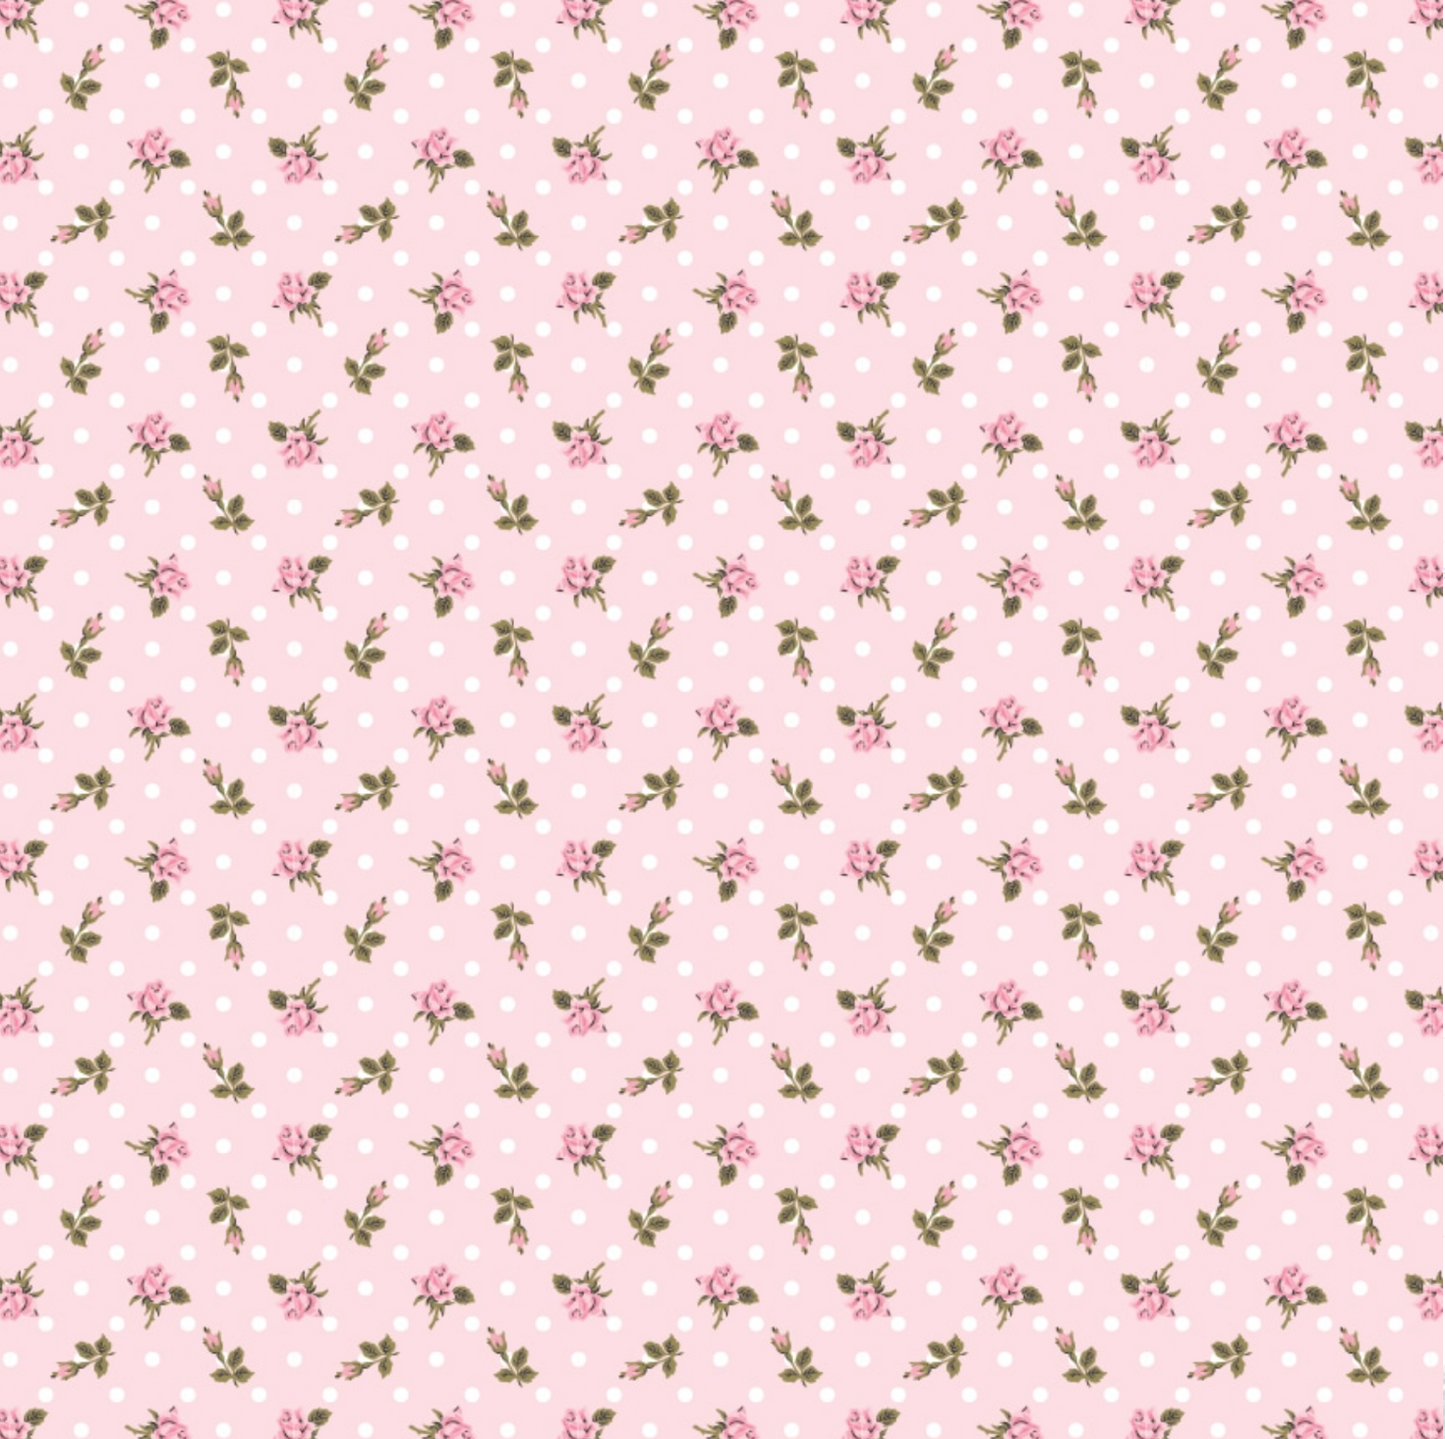 Delightful Department Store Lucy Pink DS23215, sold by the 1/2 yard